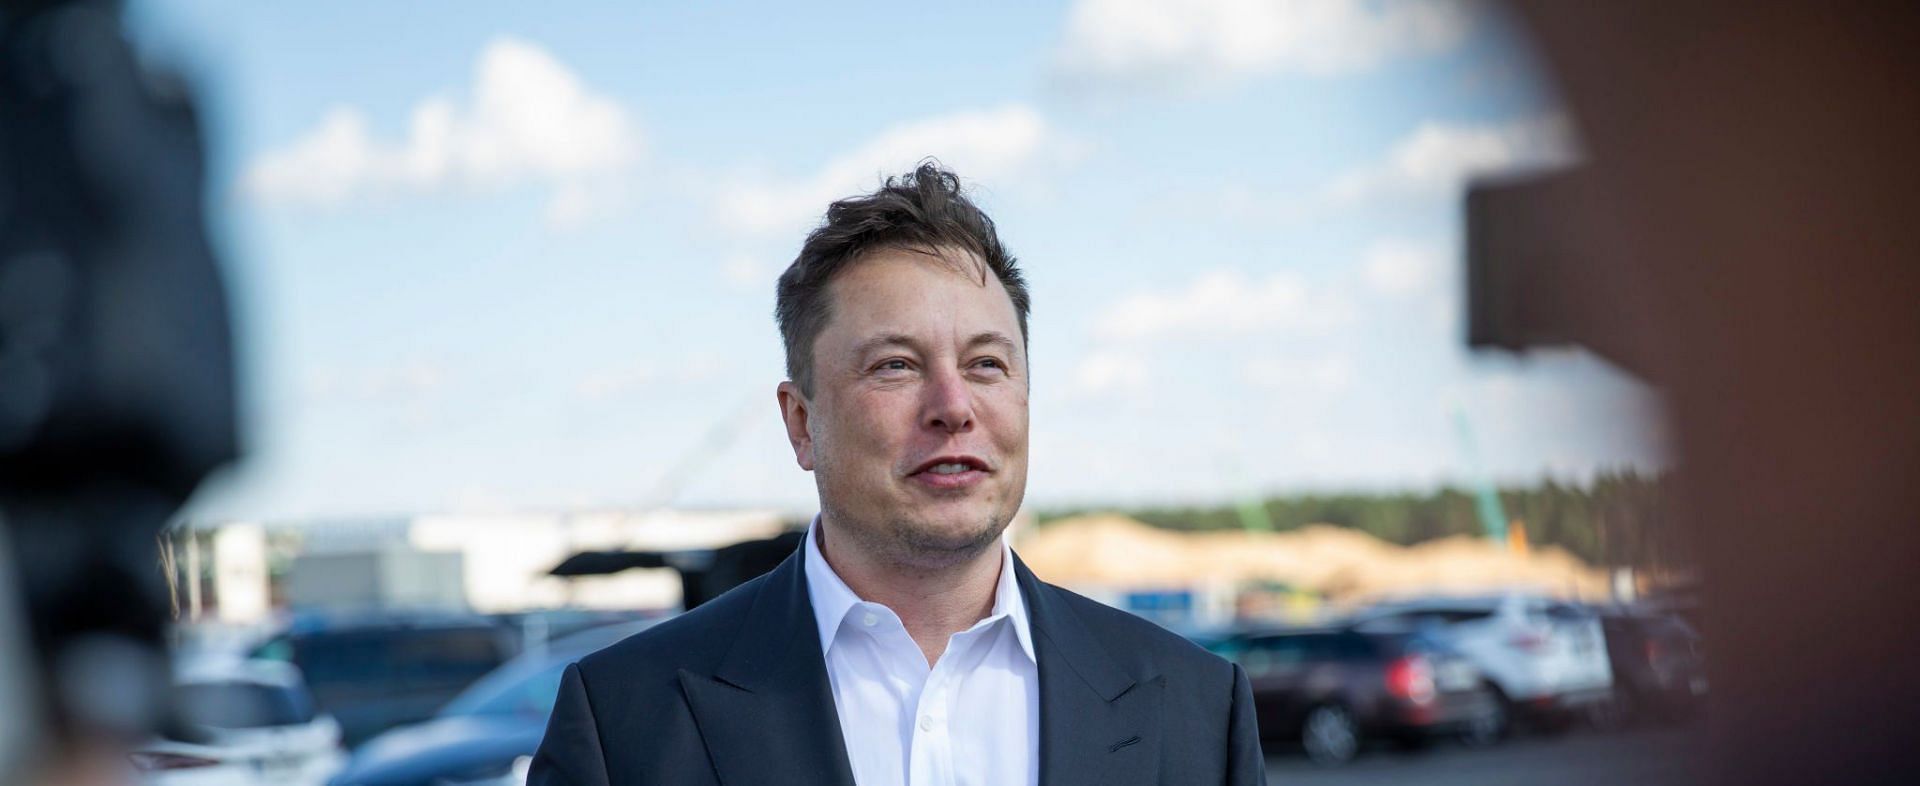 Netizens called out Elon Musk for mocking and firing designer Halli Thorleifsson (Image via Getty Images)